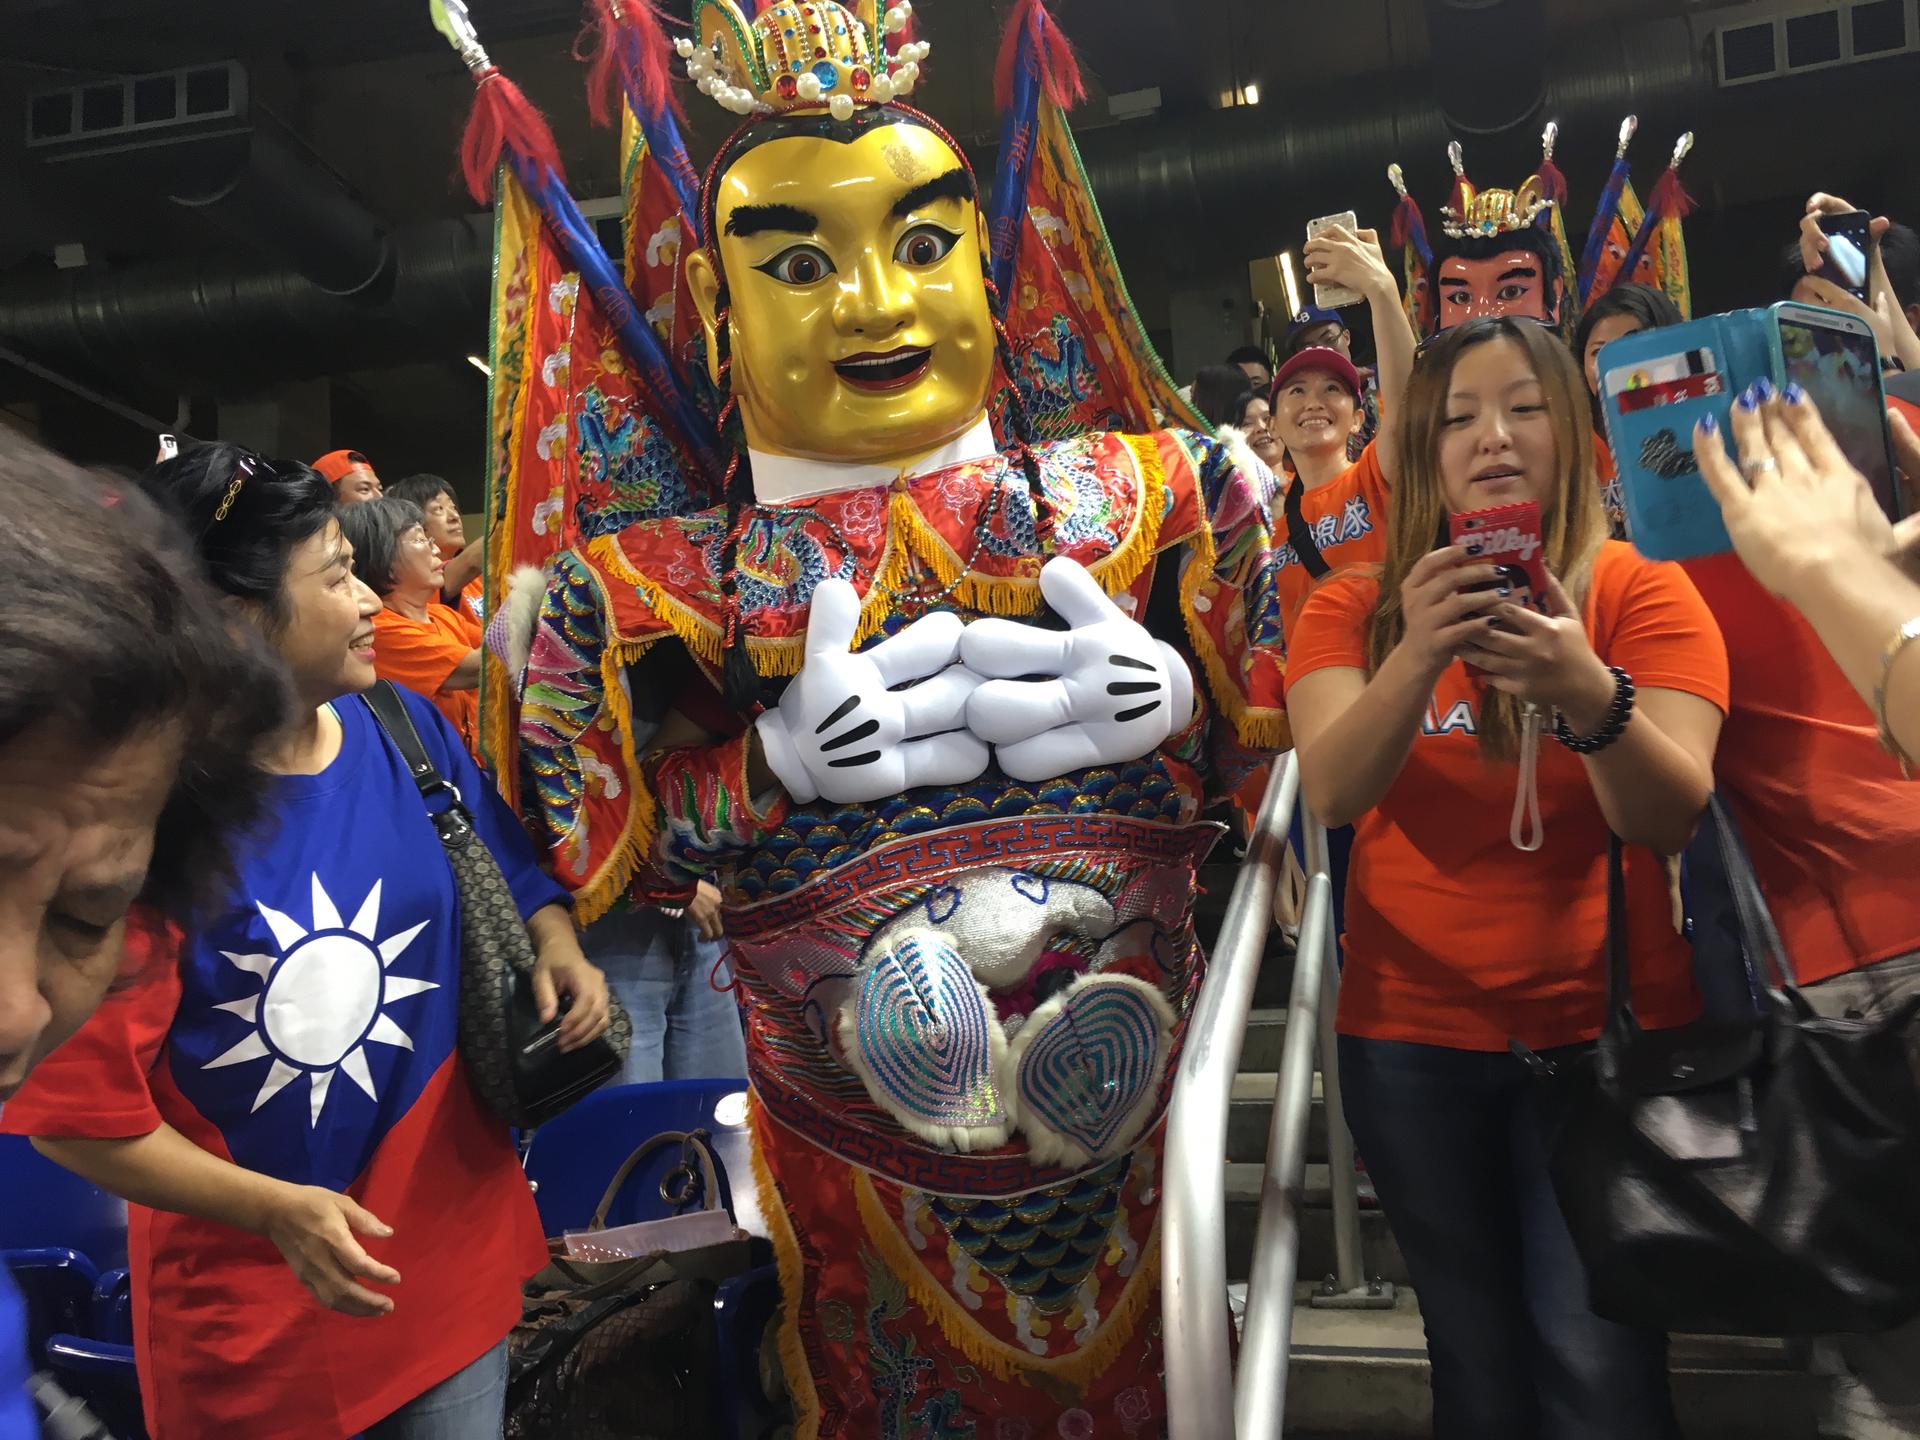 People dressed up like famous Taiwanese gods to celebrate Taiwanese Heritage Night At Marlins Park.